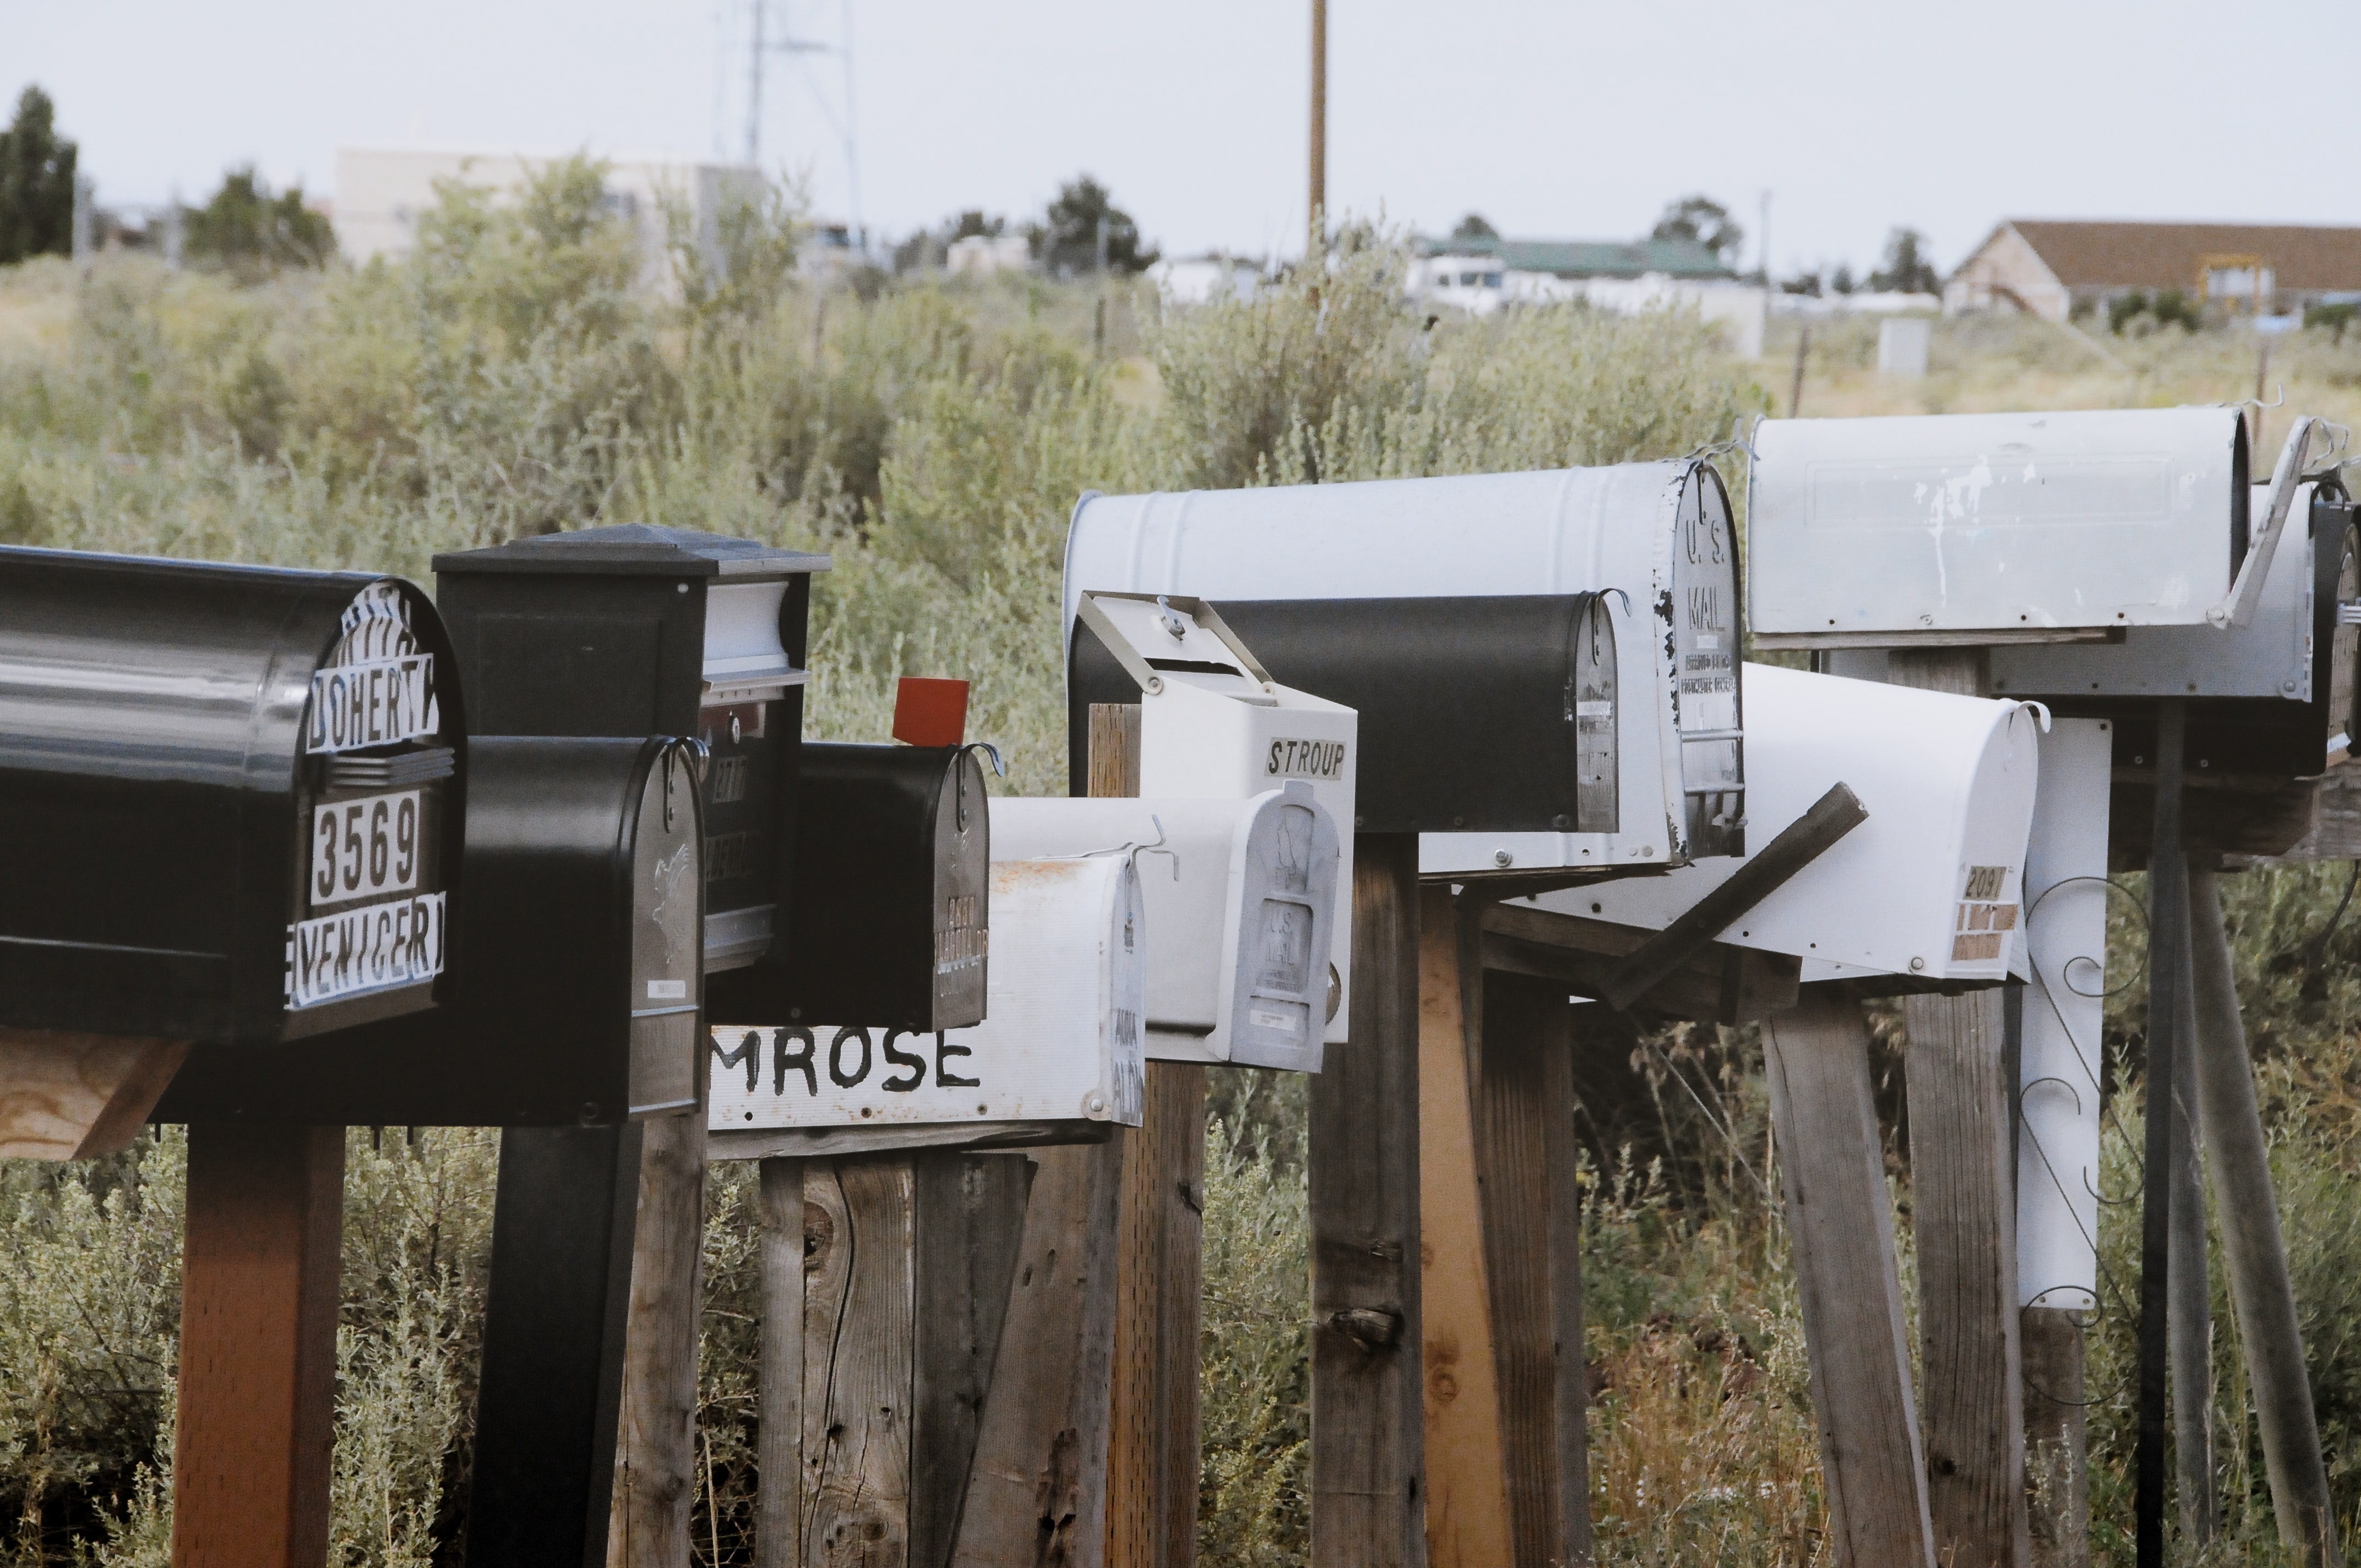 A line of mailboxes on the side of a road, with a backdrop of tall grass